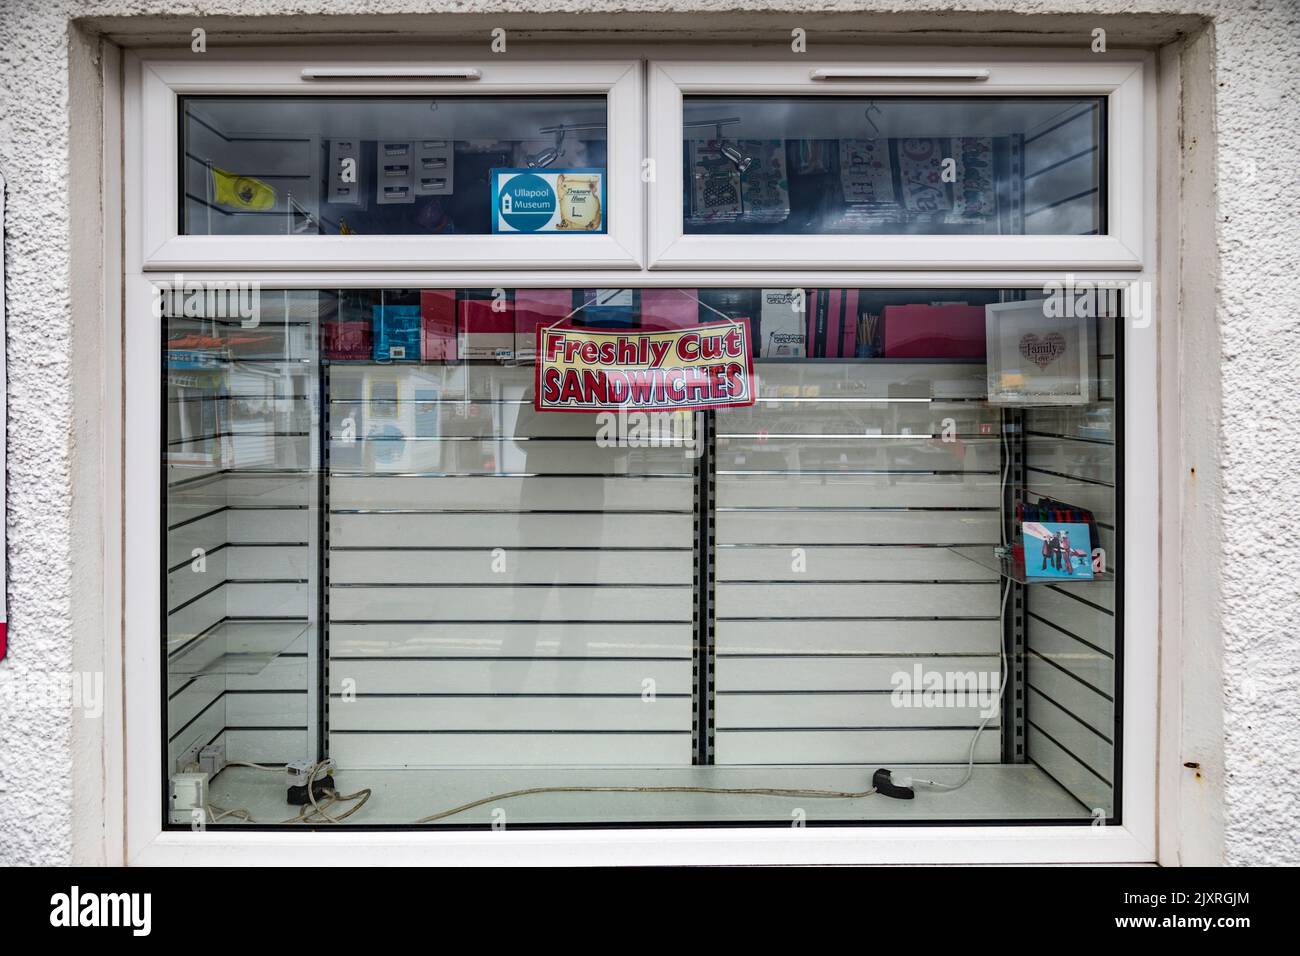 Sign offering 'freshly cut sandwiches' in an empty shop window, Scotland. Stock Photo